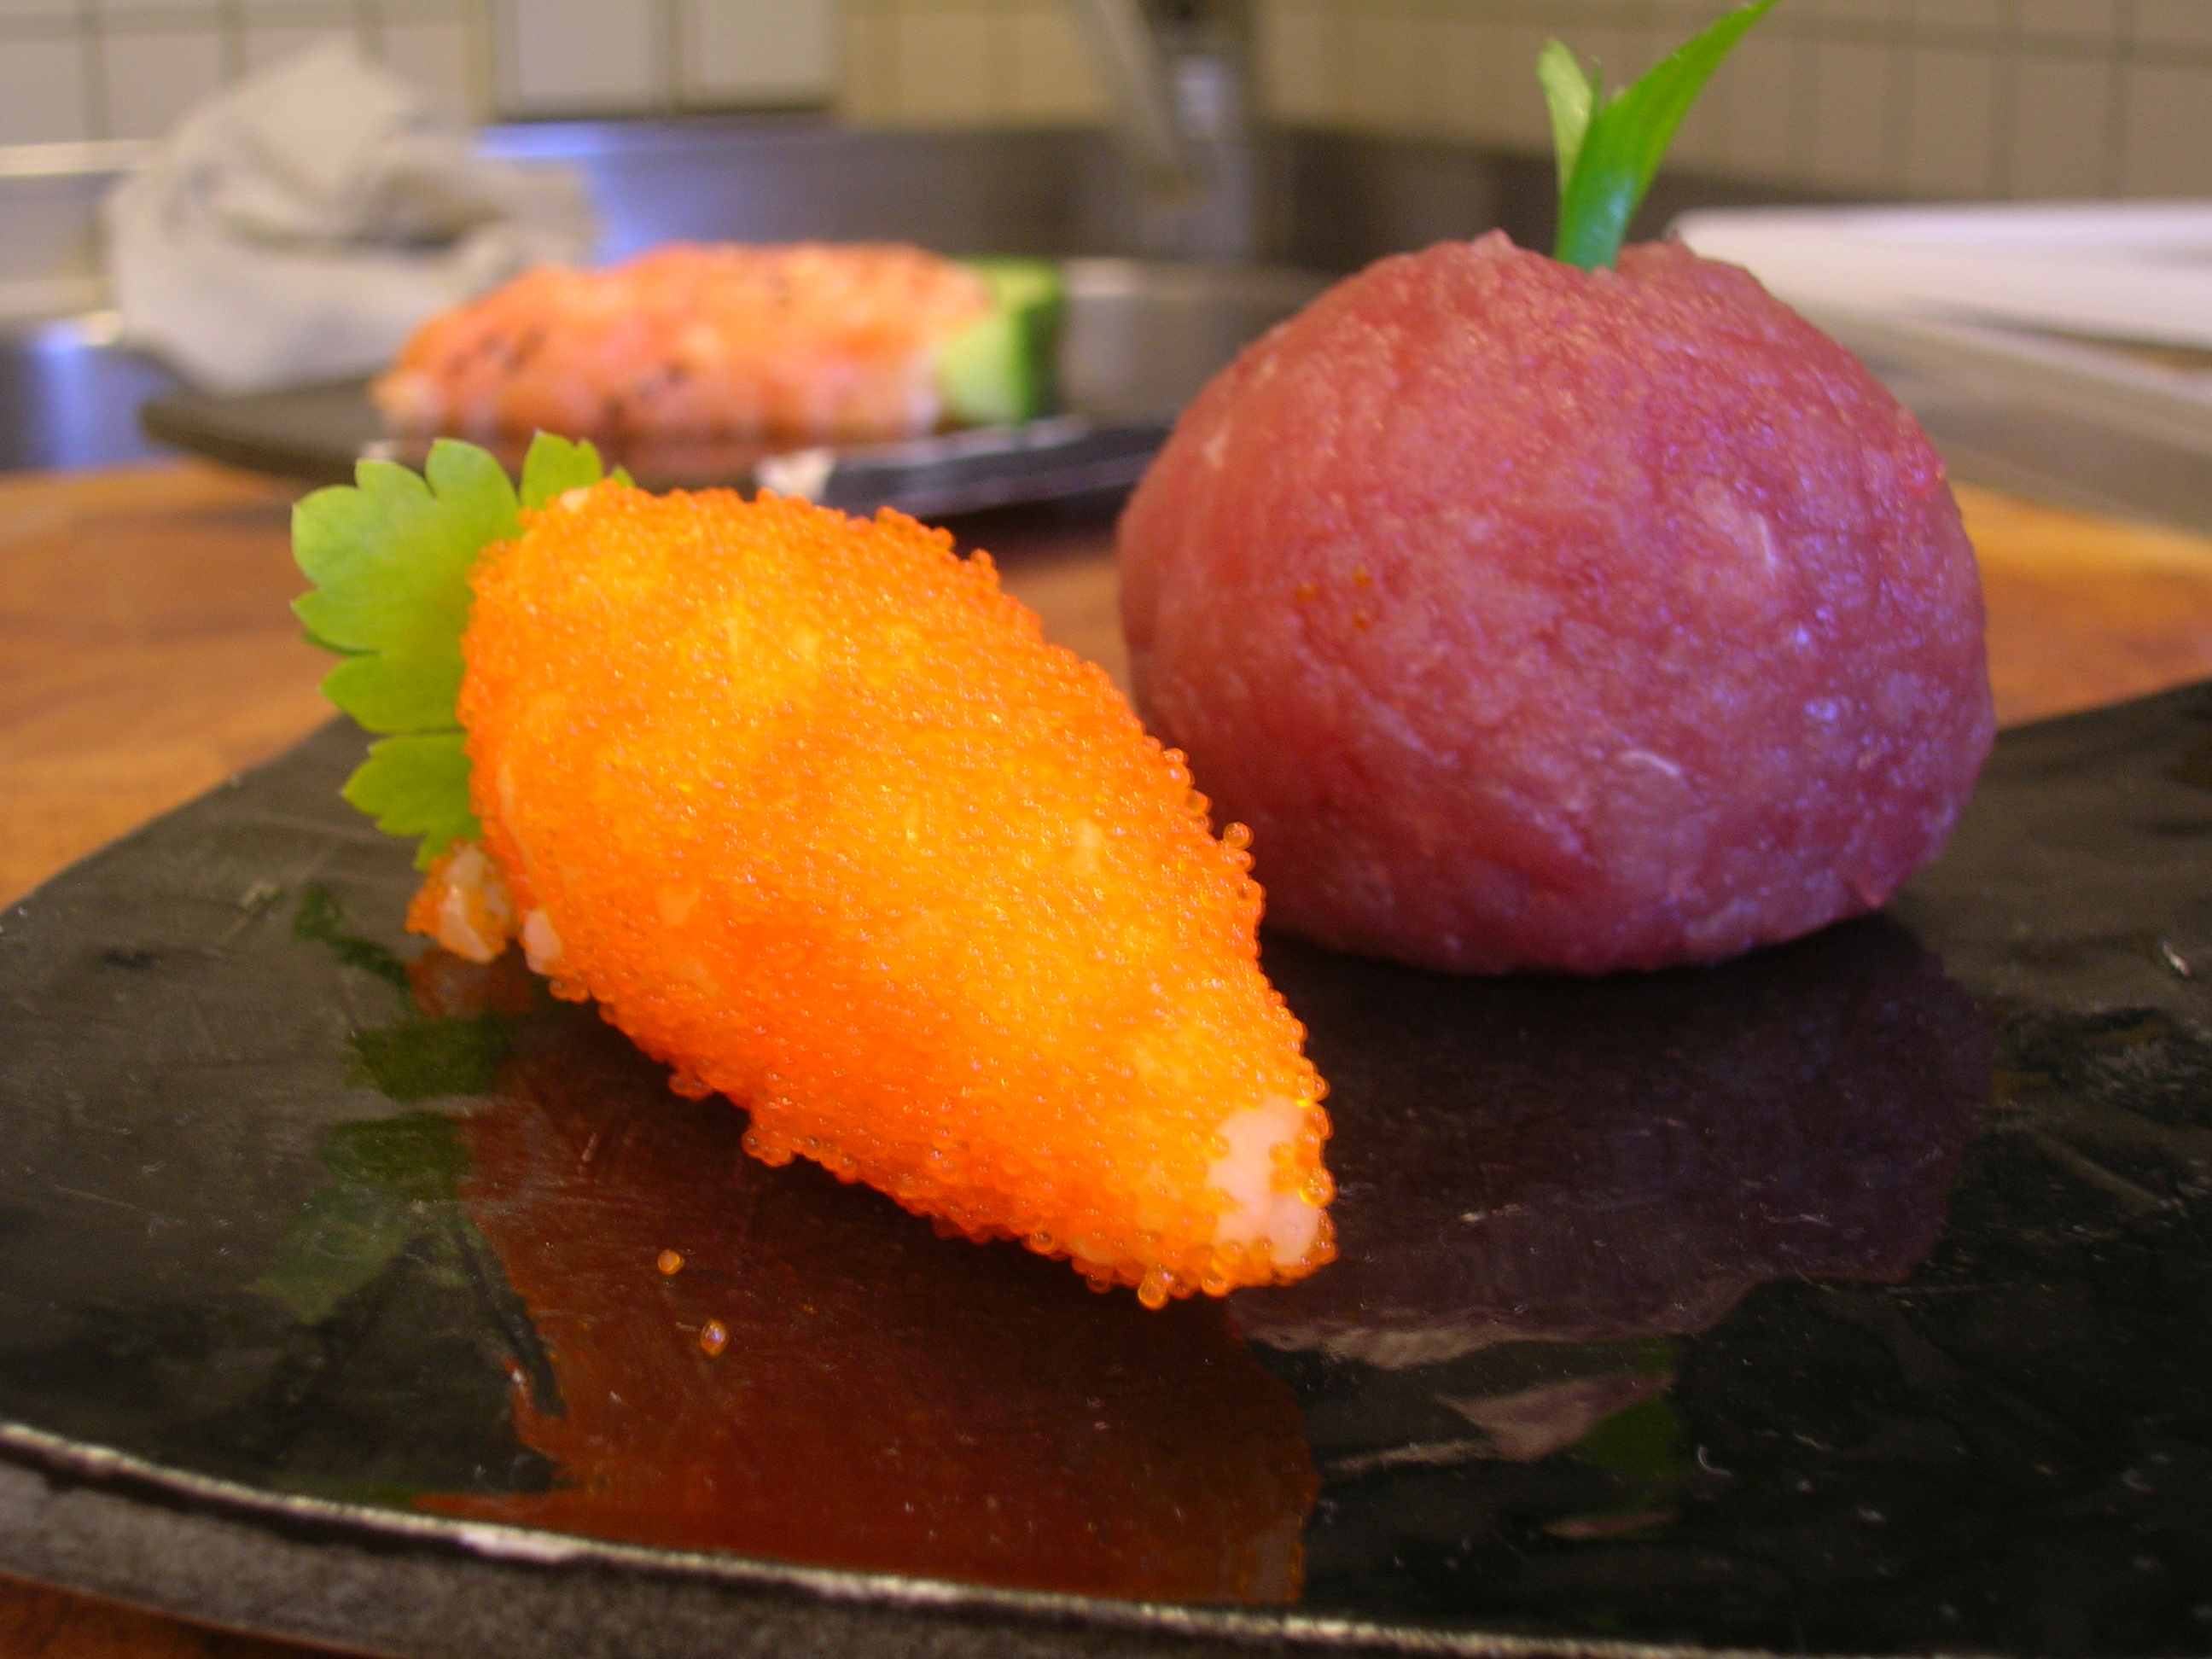 http://upload.wikimedia.org/wikipedia/commons/2/27/Sushi_carrot_and_apricot.jpg